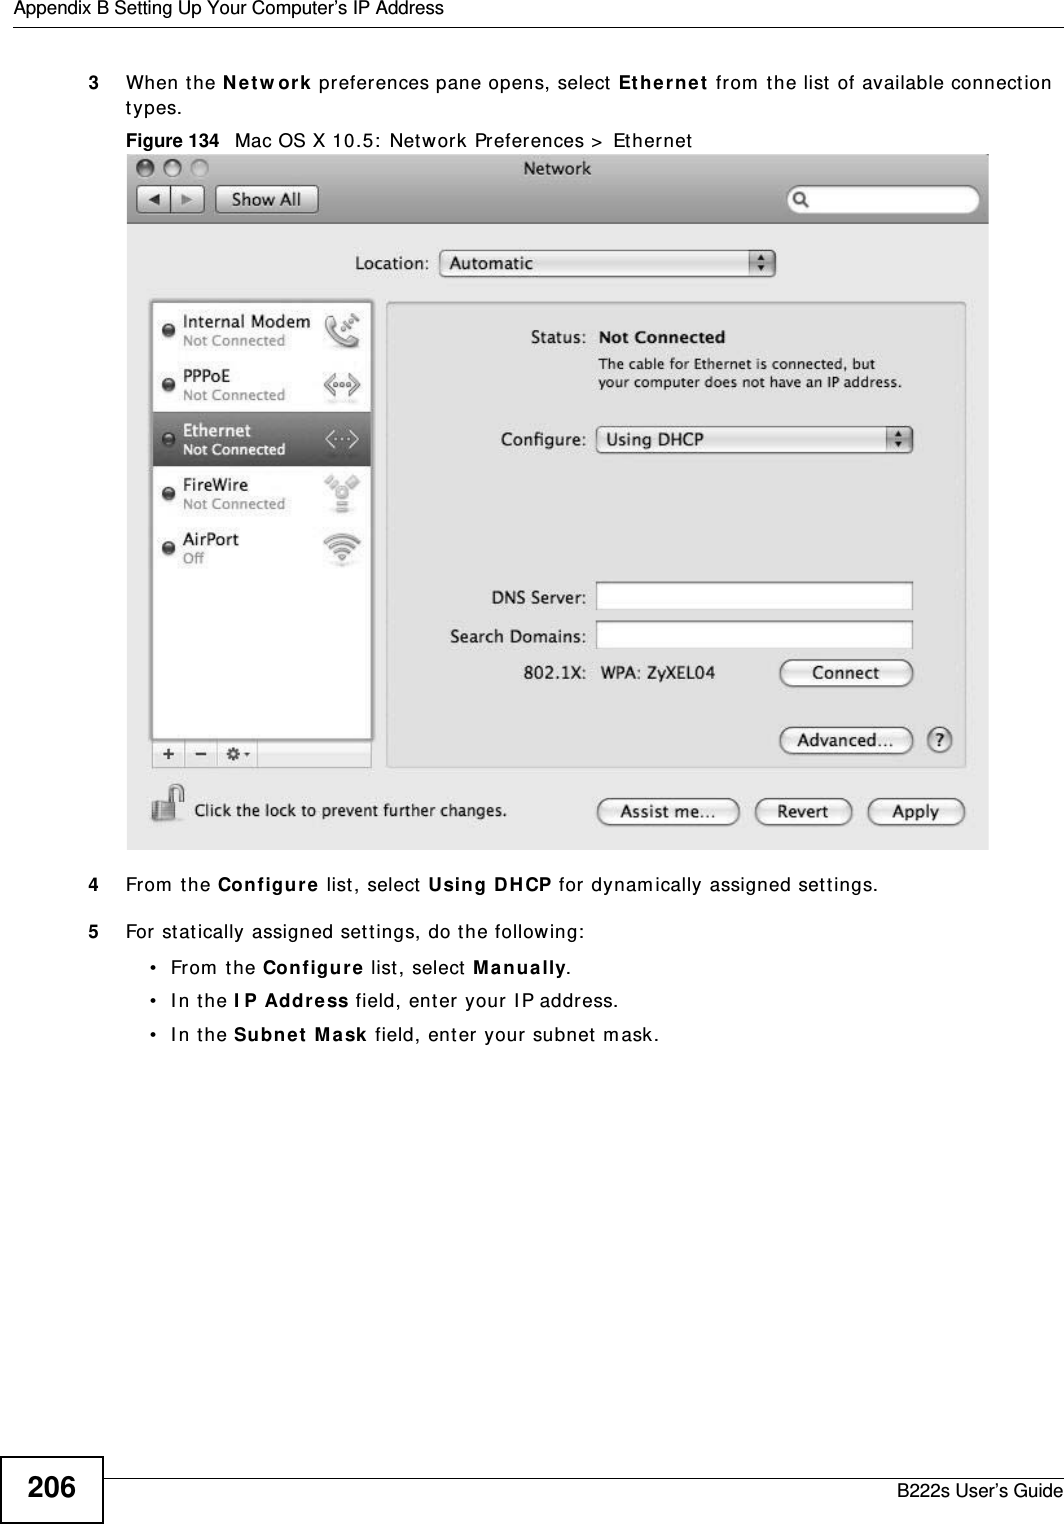 Appendix B Setting Up Your Computer’s IP AddressB222s User’s Guide2063When the N e t w or k  preferences pane opens, select  Et he r ne t  from  t he list  of available connect ion types.Figure 134   Mac OS X 10.5:  Network Preferences &gt;  Et hernet4From  t he Configur e  list , select  Using D H CP for  dynam ically assigned set tings.5For stat ically assigned set t ings, do the follow ing:• From the Configur e  list, select  M anually.• In the I P Address field, ent er  your I P address.• In the Subn et  M a sk  field, ent er your subnet m ask.